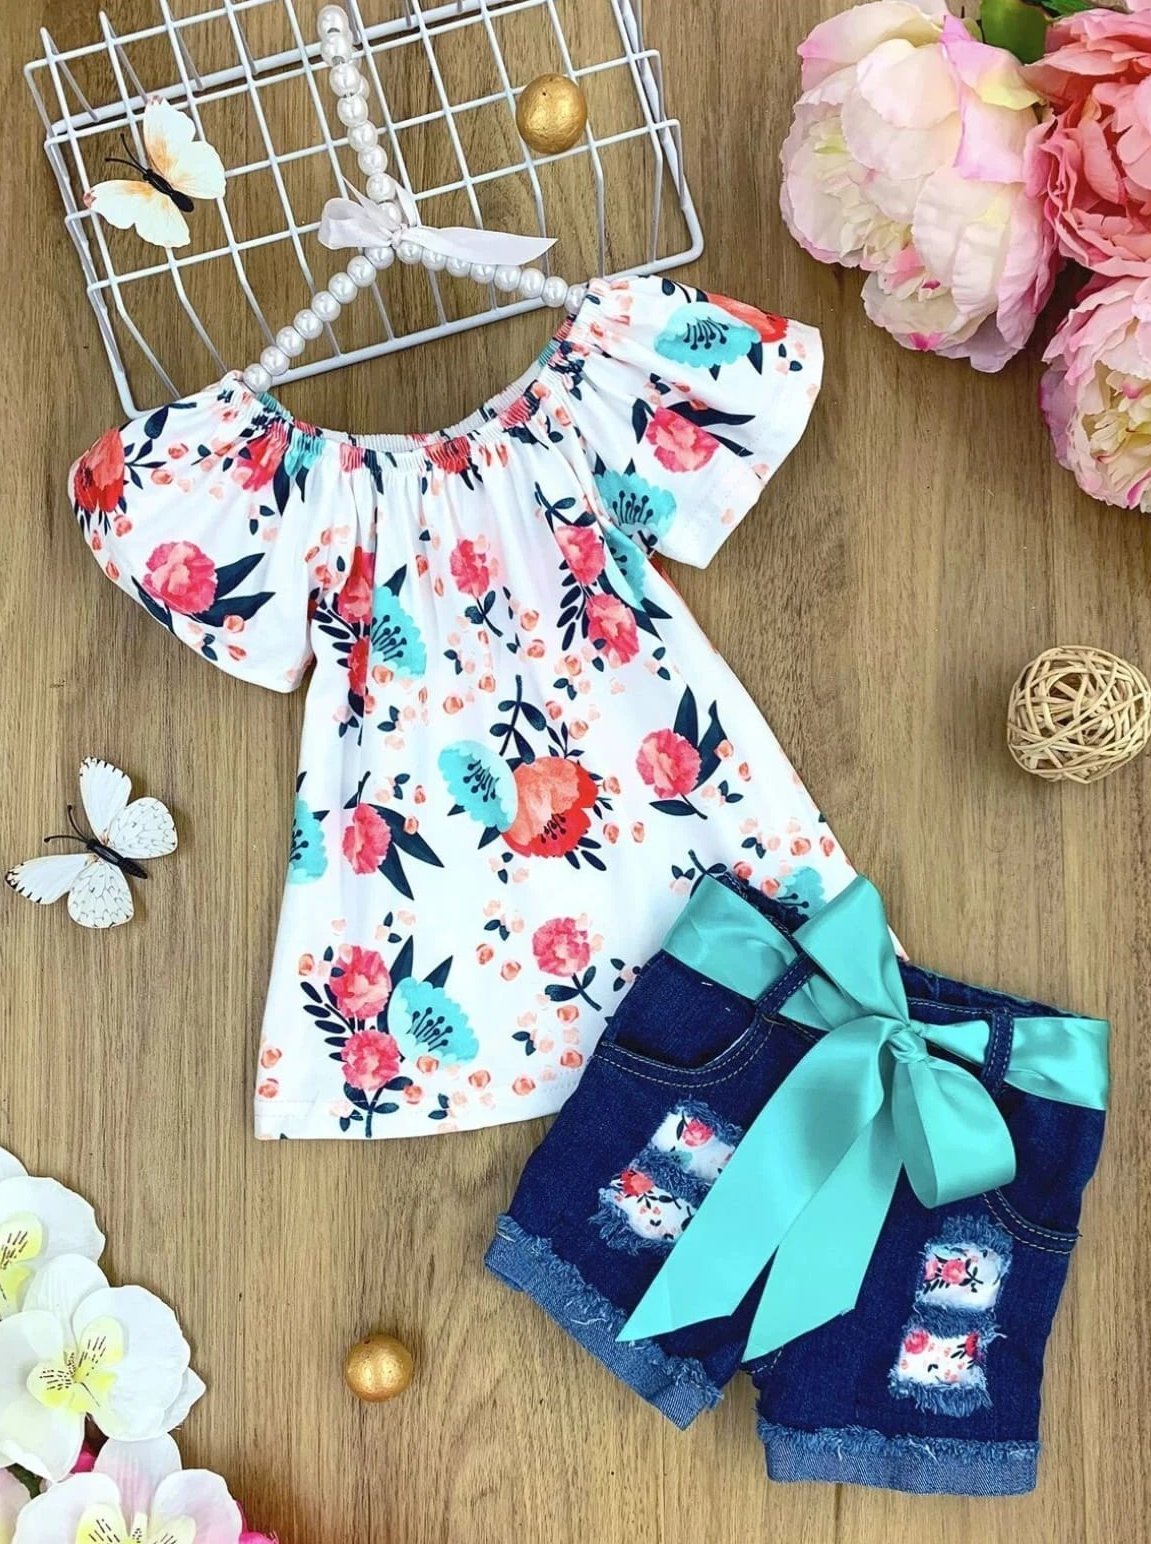 Girls Floral Tunic and Sashed Ripped Denim Shorts Set - Peach / 2T - Girls Spring Casual Set